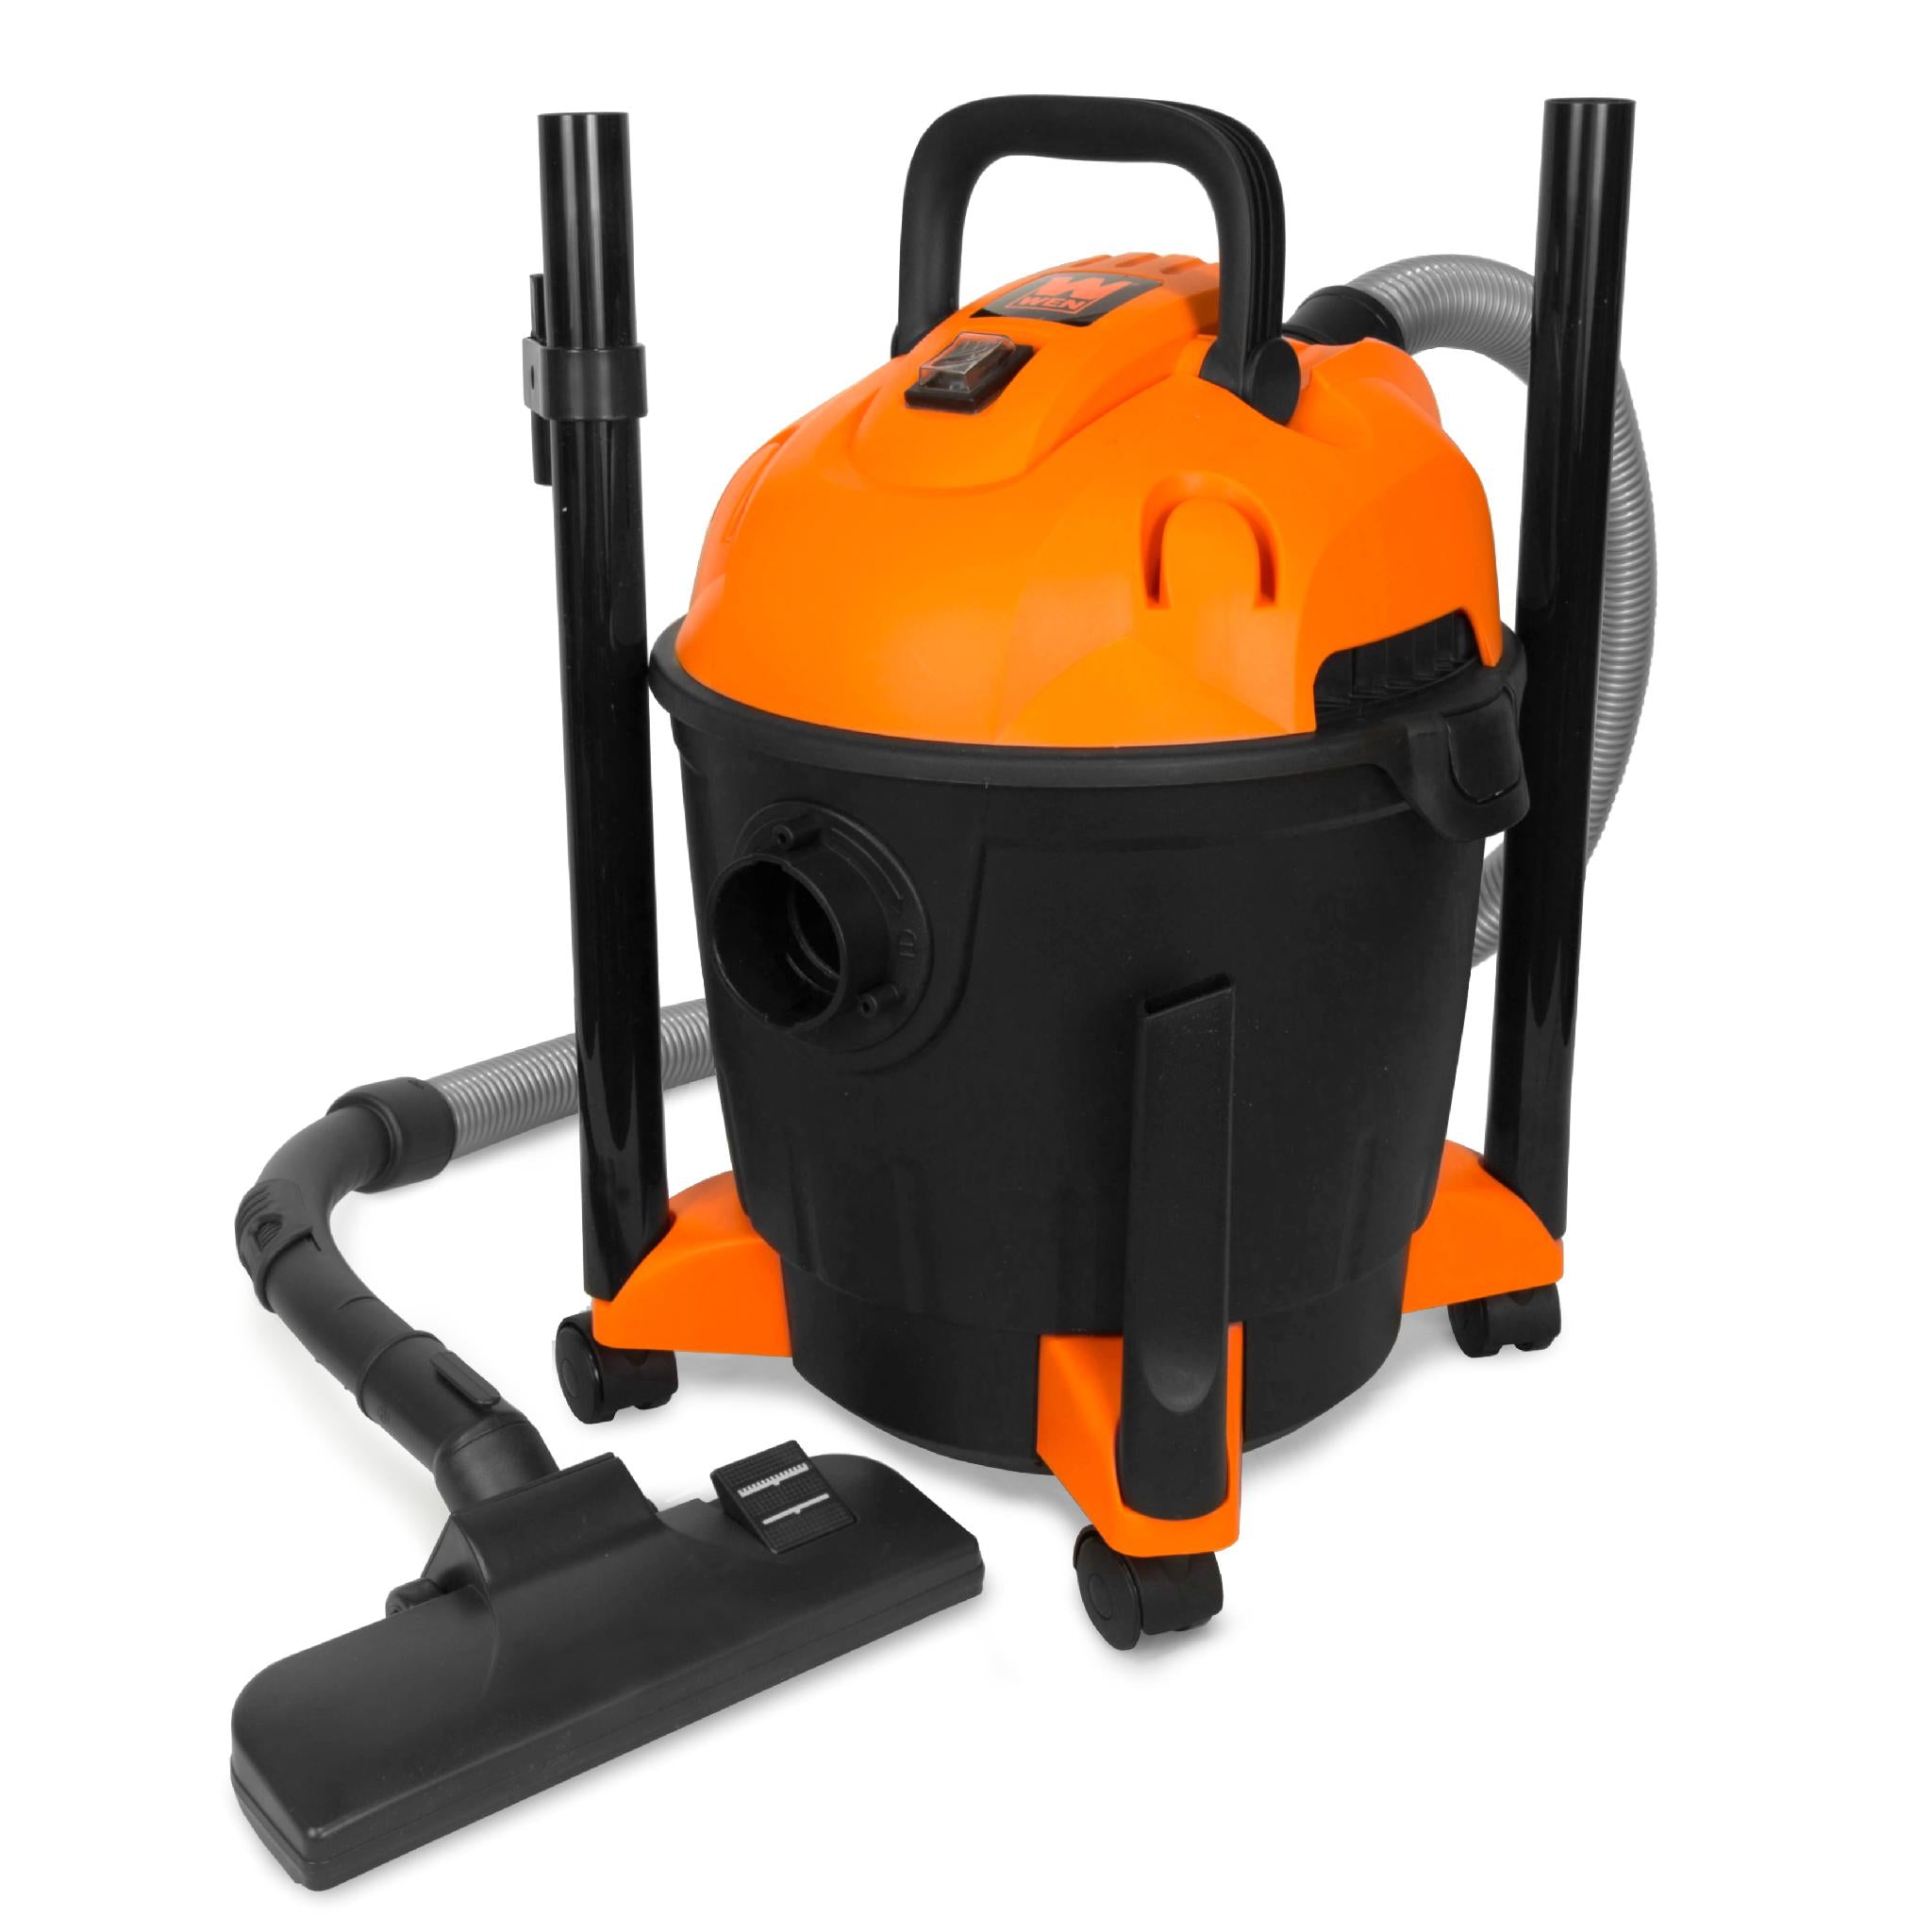 Photo 1 of WEN VC4710 10-Amp 5-Gallon Portable HEPA Wet/Dry Shop Vacuum and Blower with 0.3-Micron Filter, Hose, and Accessories